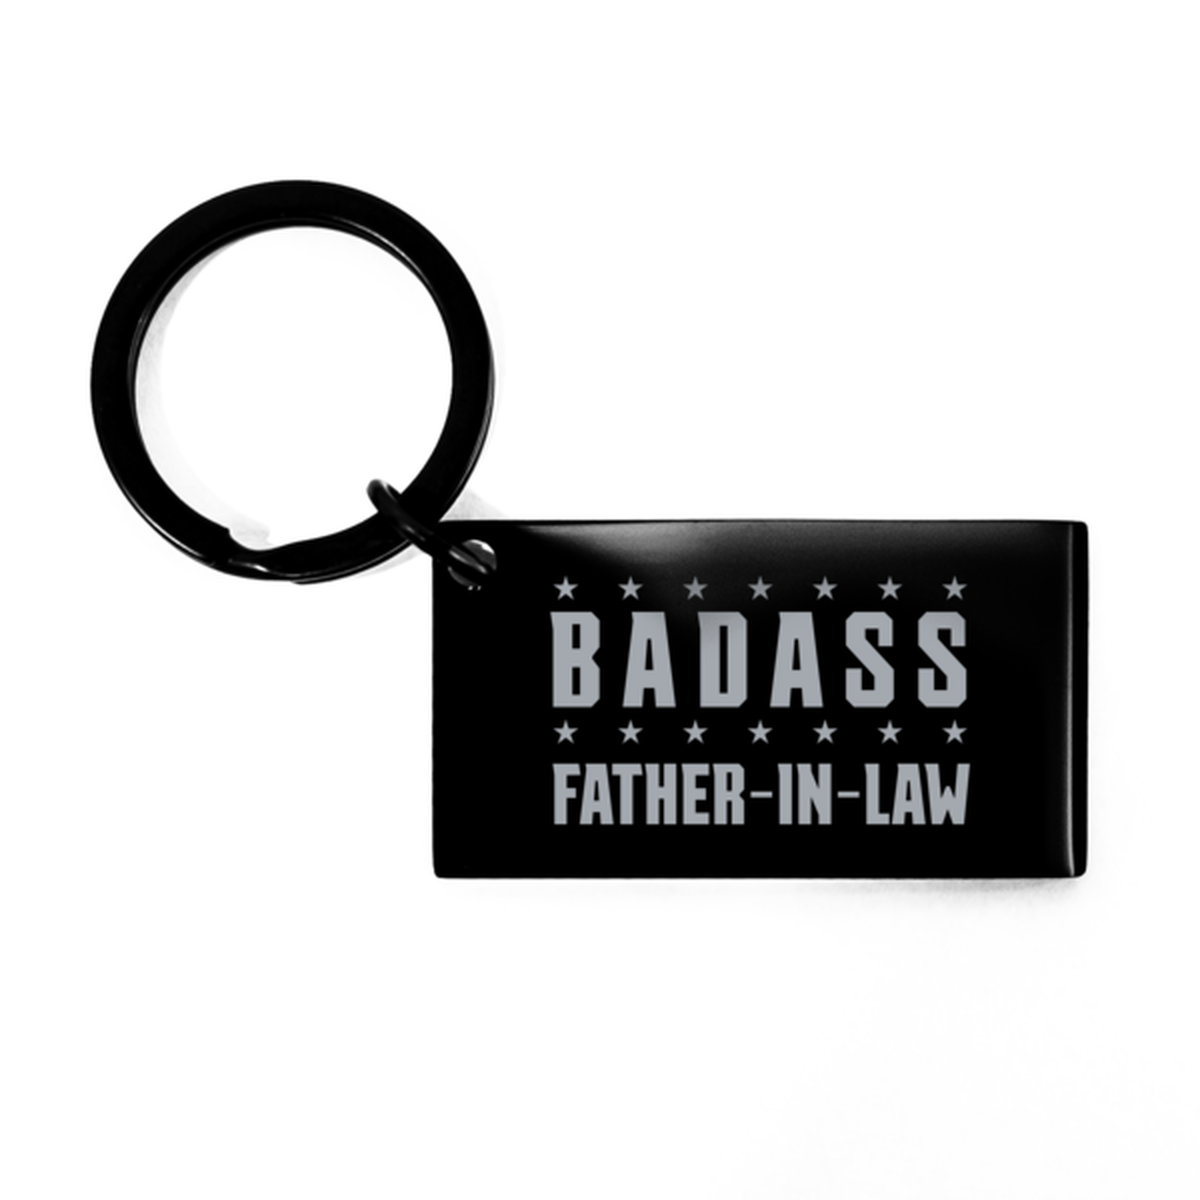 Father-in-law Black Keychain, Badass Father-in-law, Funny Family Gifts  Keyring For Father-in-law From Son Daughter